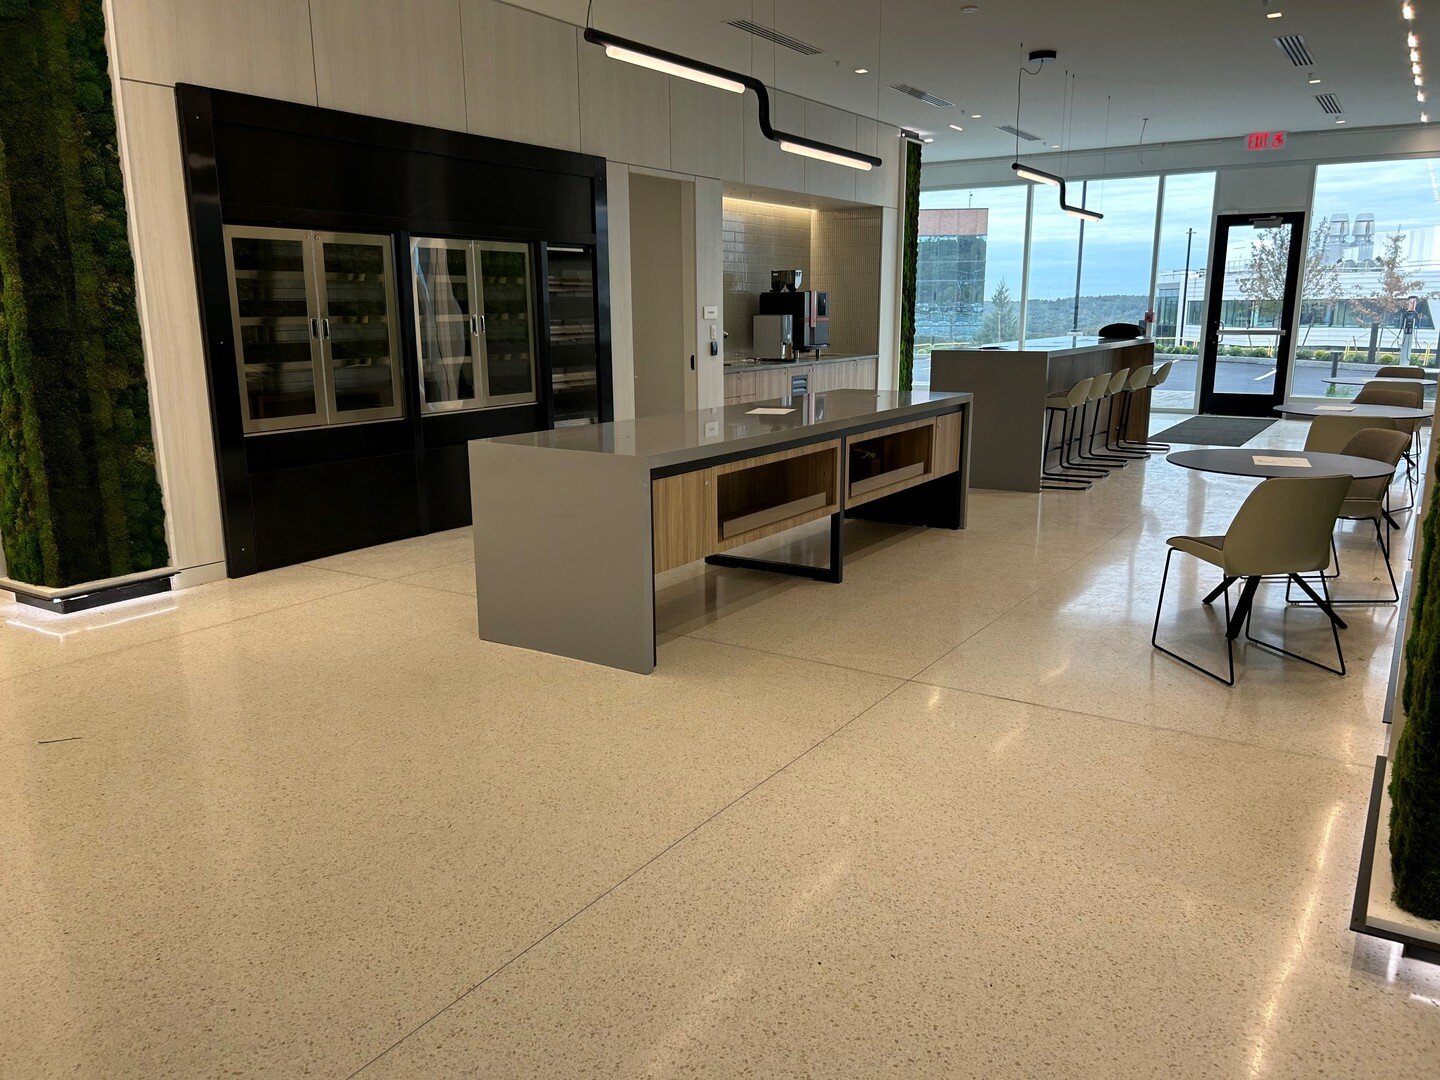 We don't often share a lot of the office work that we do, but here are some great shots from the recently completed @bxpwaltham project. We worked with @commodorebuilders and the project was expertly installed by our union team from FEI. The project 